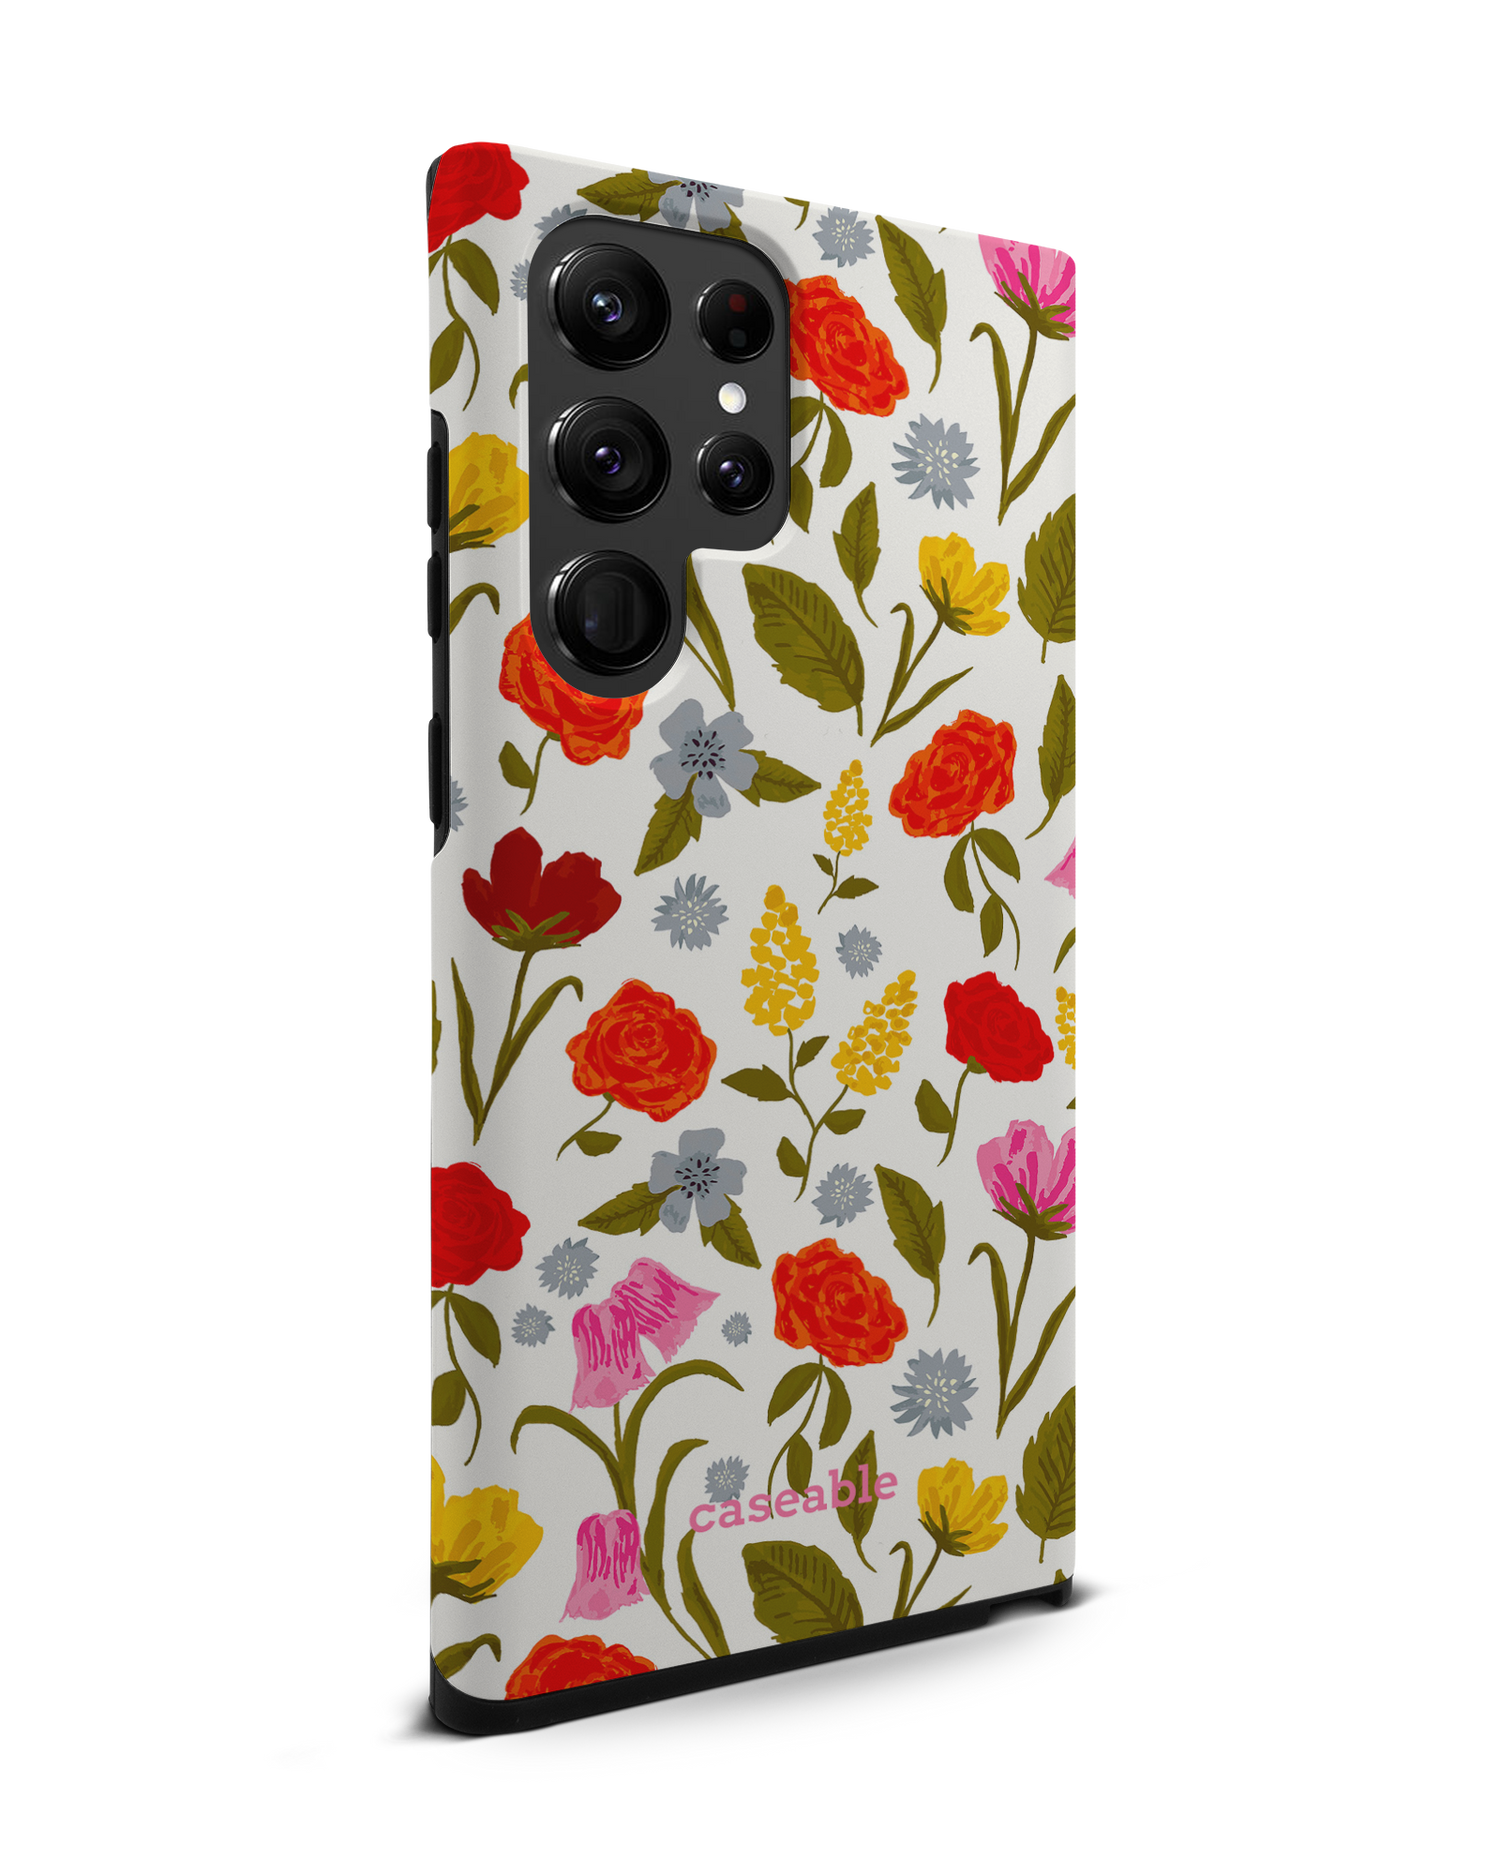 Botanical Beauties Premium Phone Case Samsung Galaxy S22 Ultra 5G: View from the left side